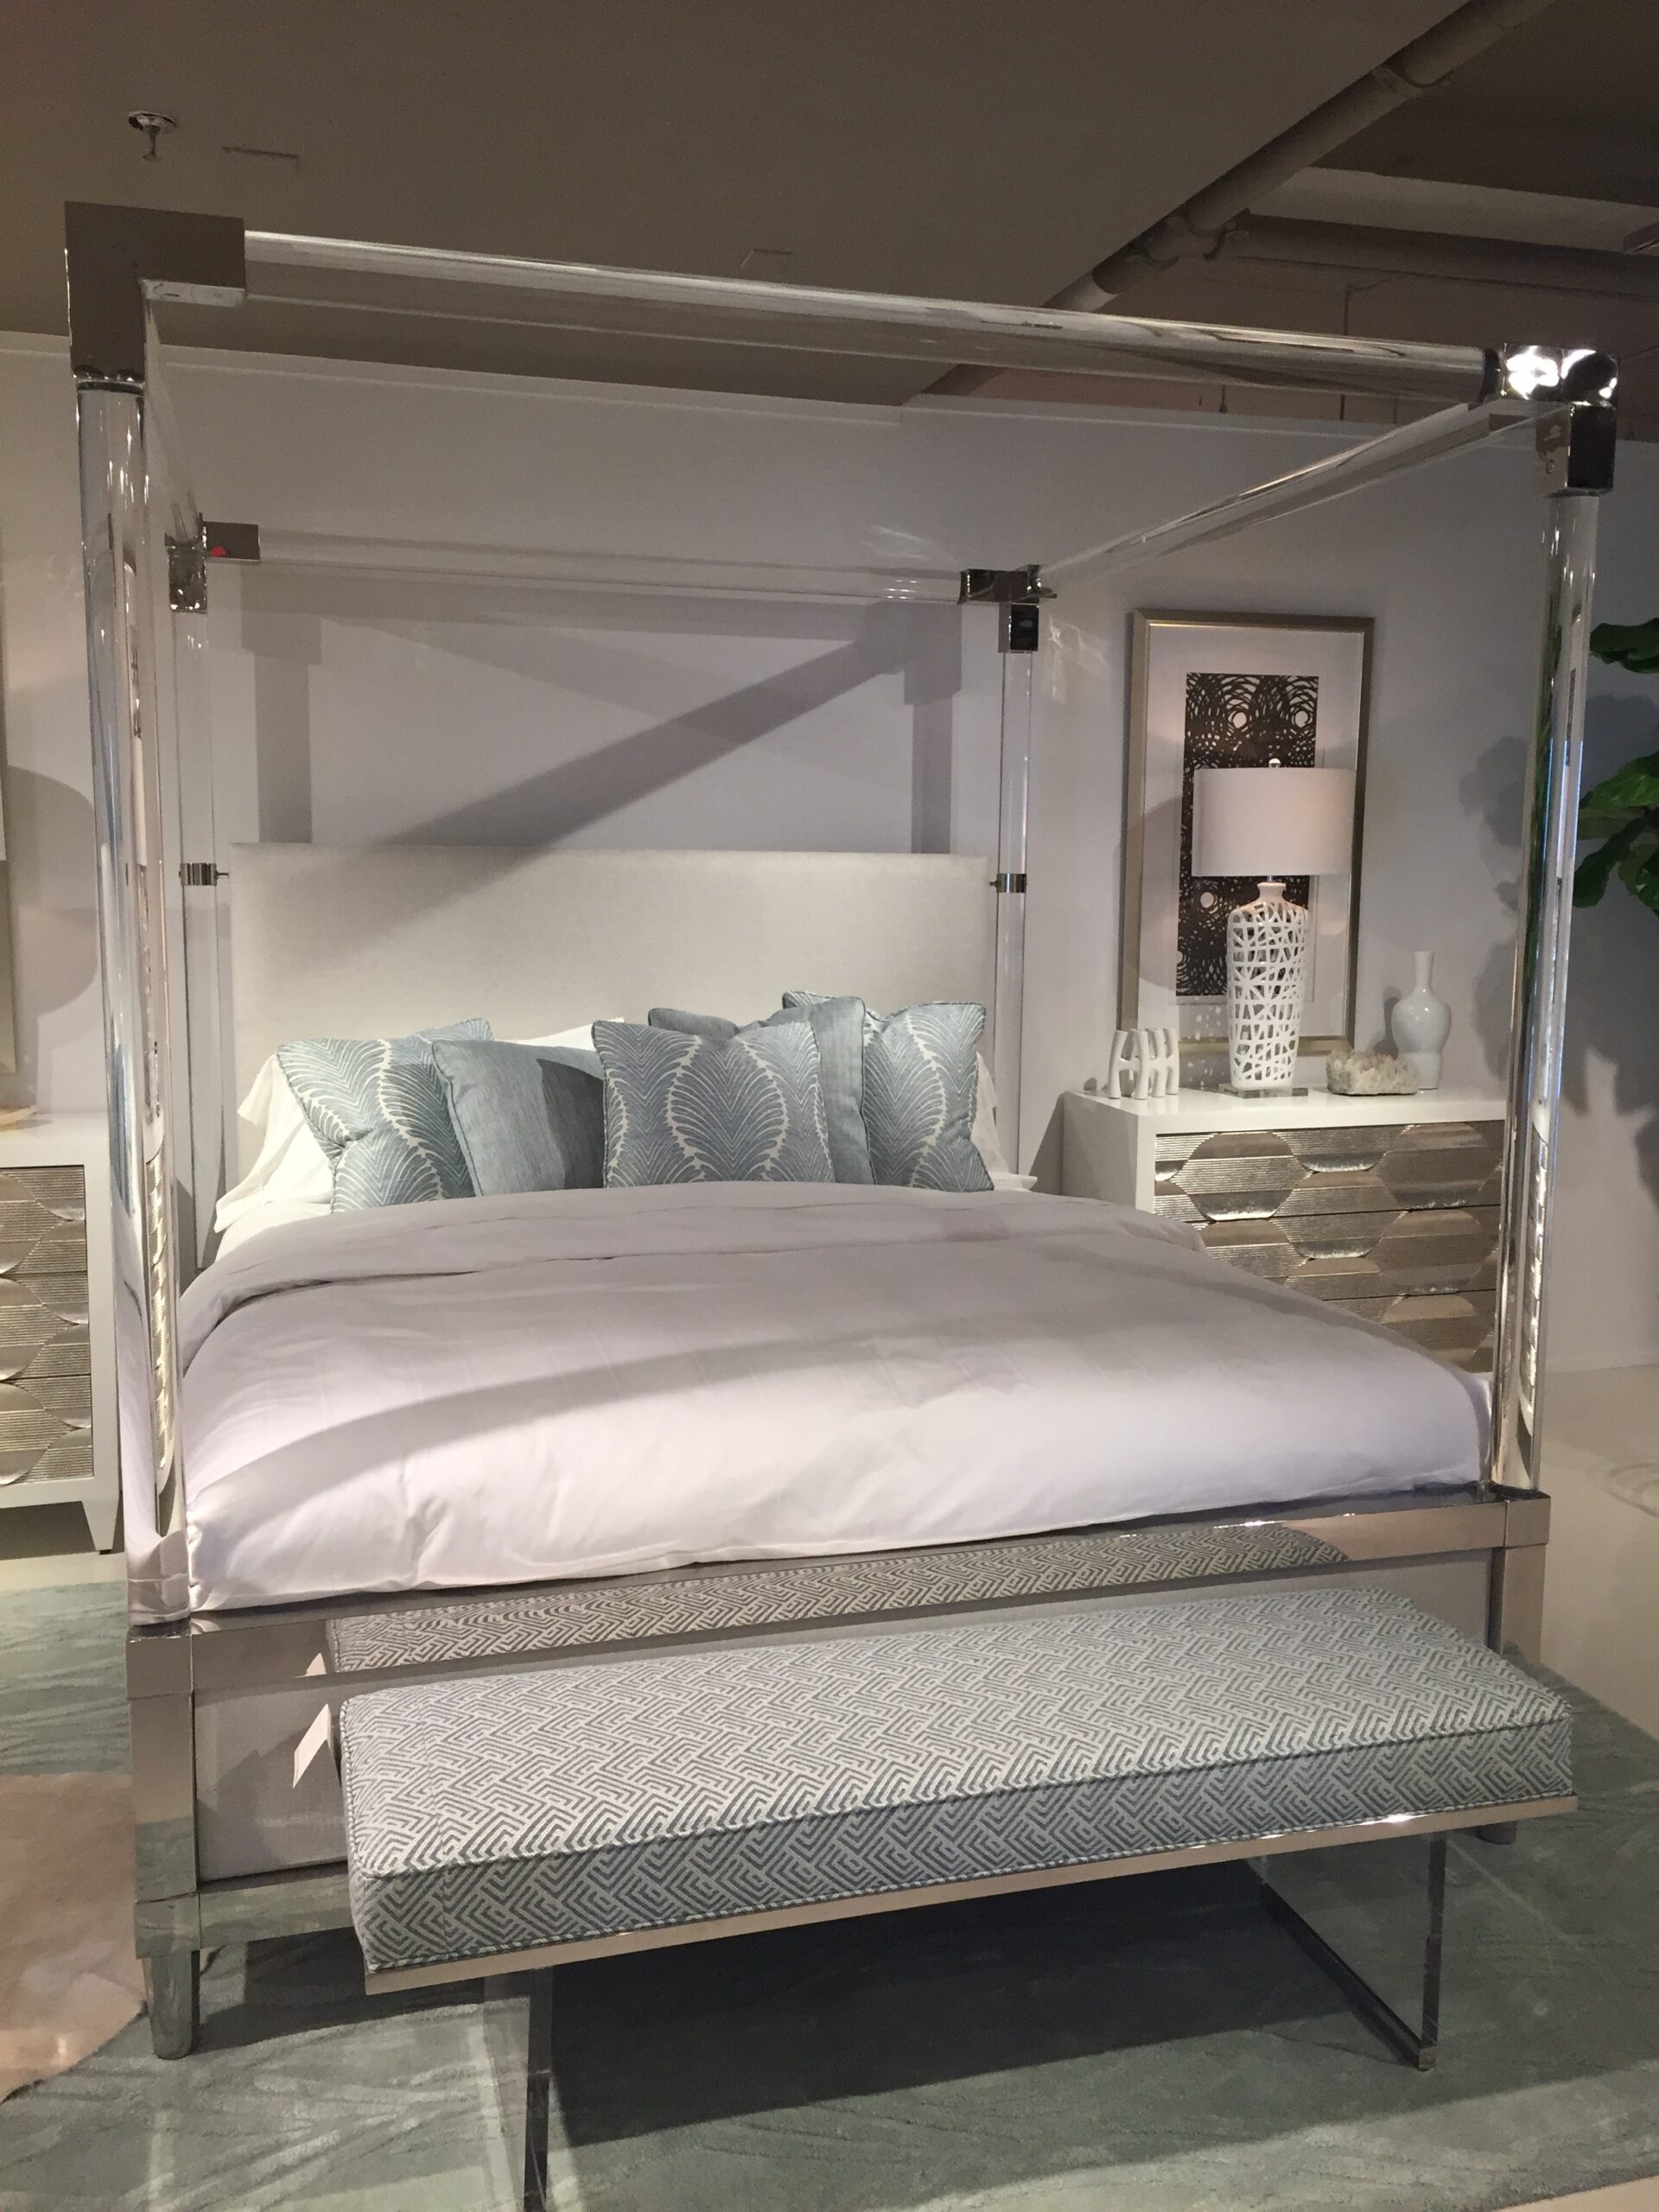 Serenity please! This masterpiece caught my eye immediately at the Bernhardt Showroom! The bed actually won an award at HPMKT! Gorgeous!